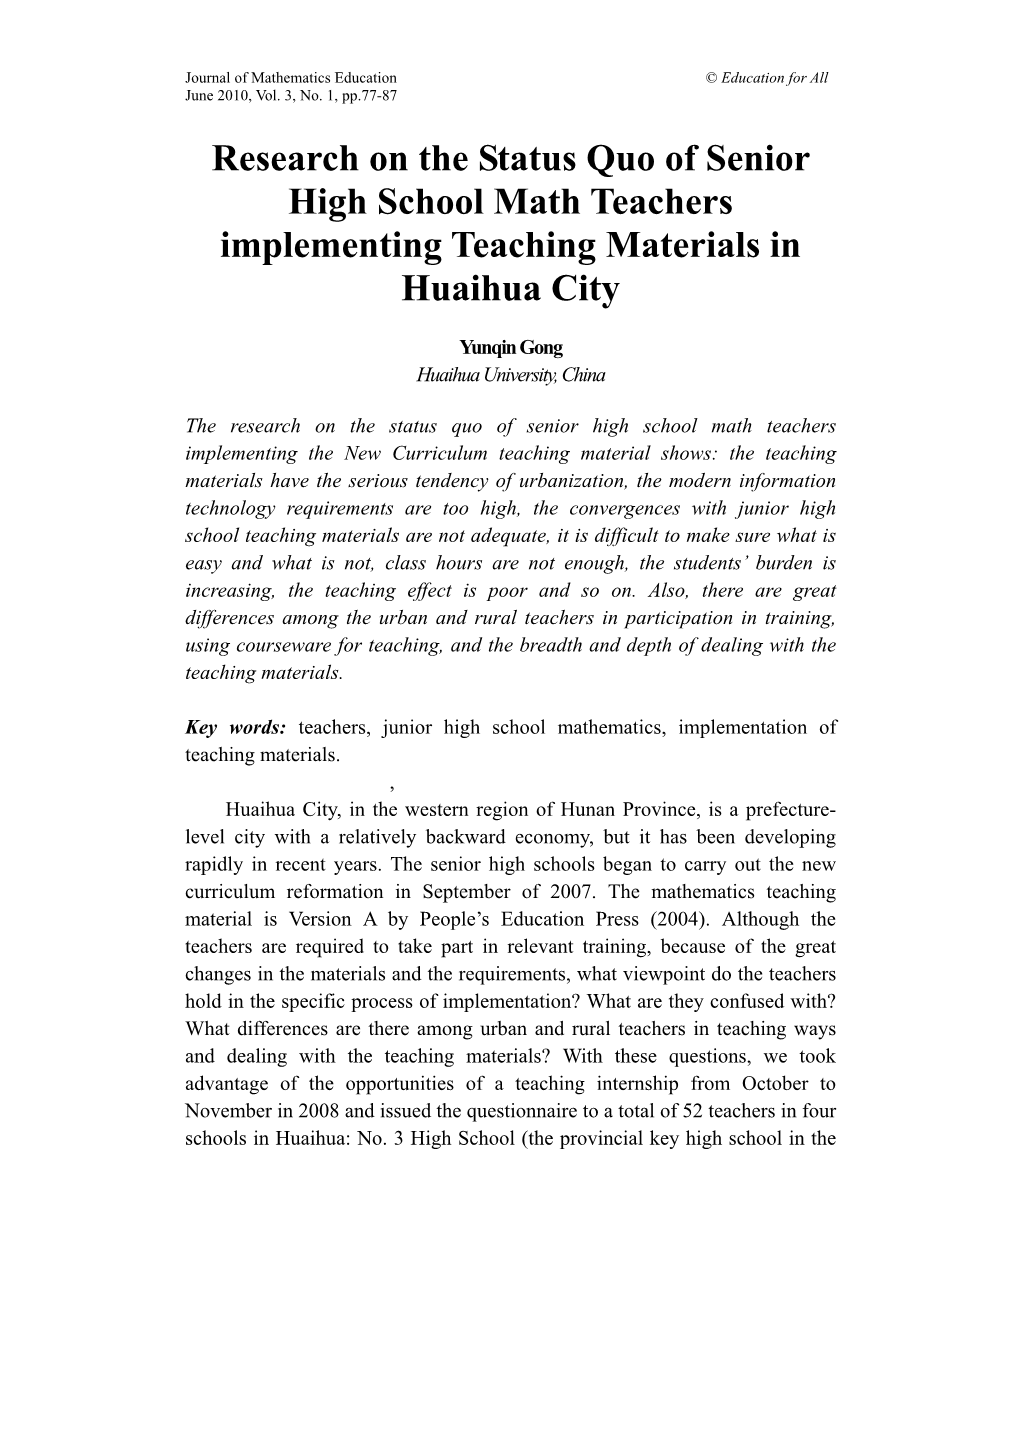 Research on the Status Quo of Senior High School Math Teachers Implementing Teaching Materials in Huaihua City